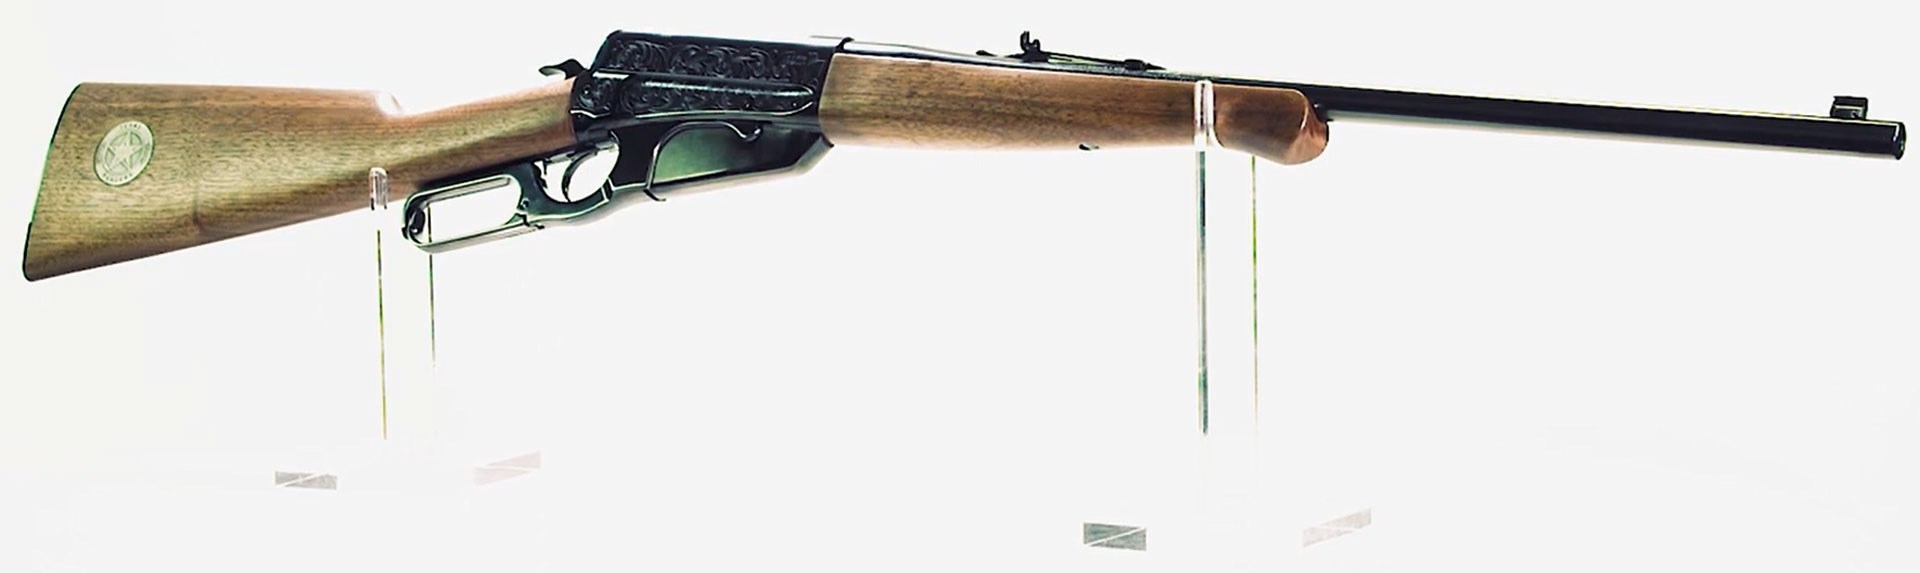 Model 1895 in stand